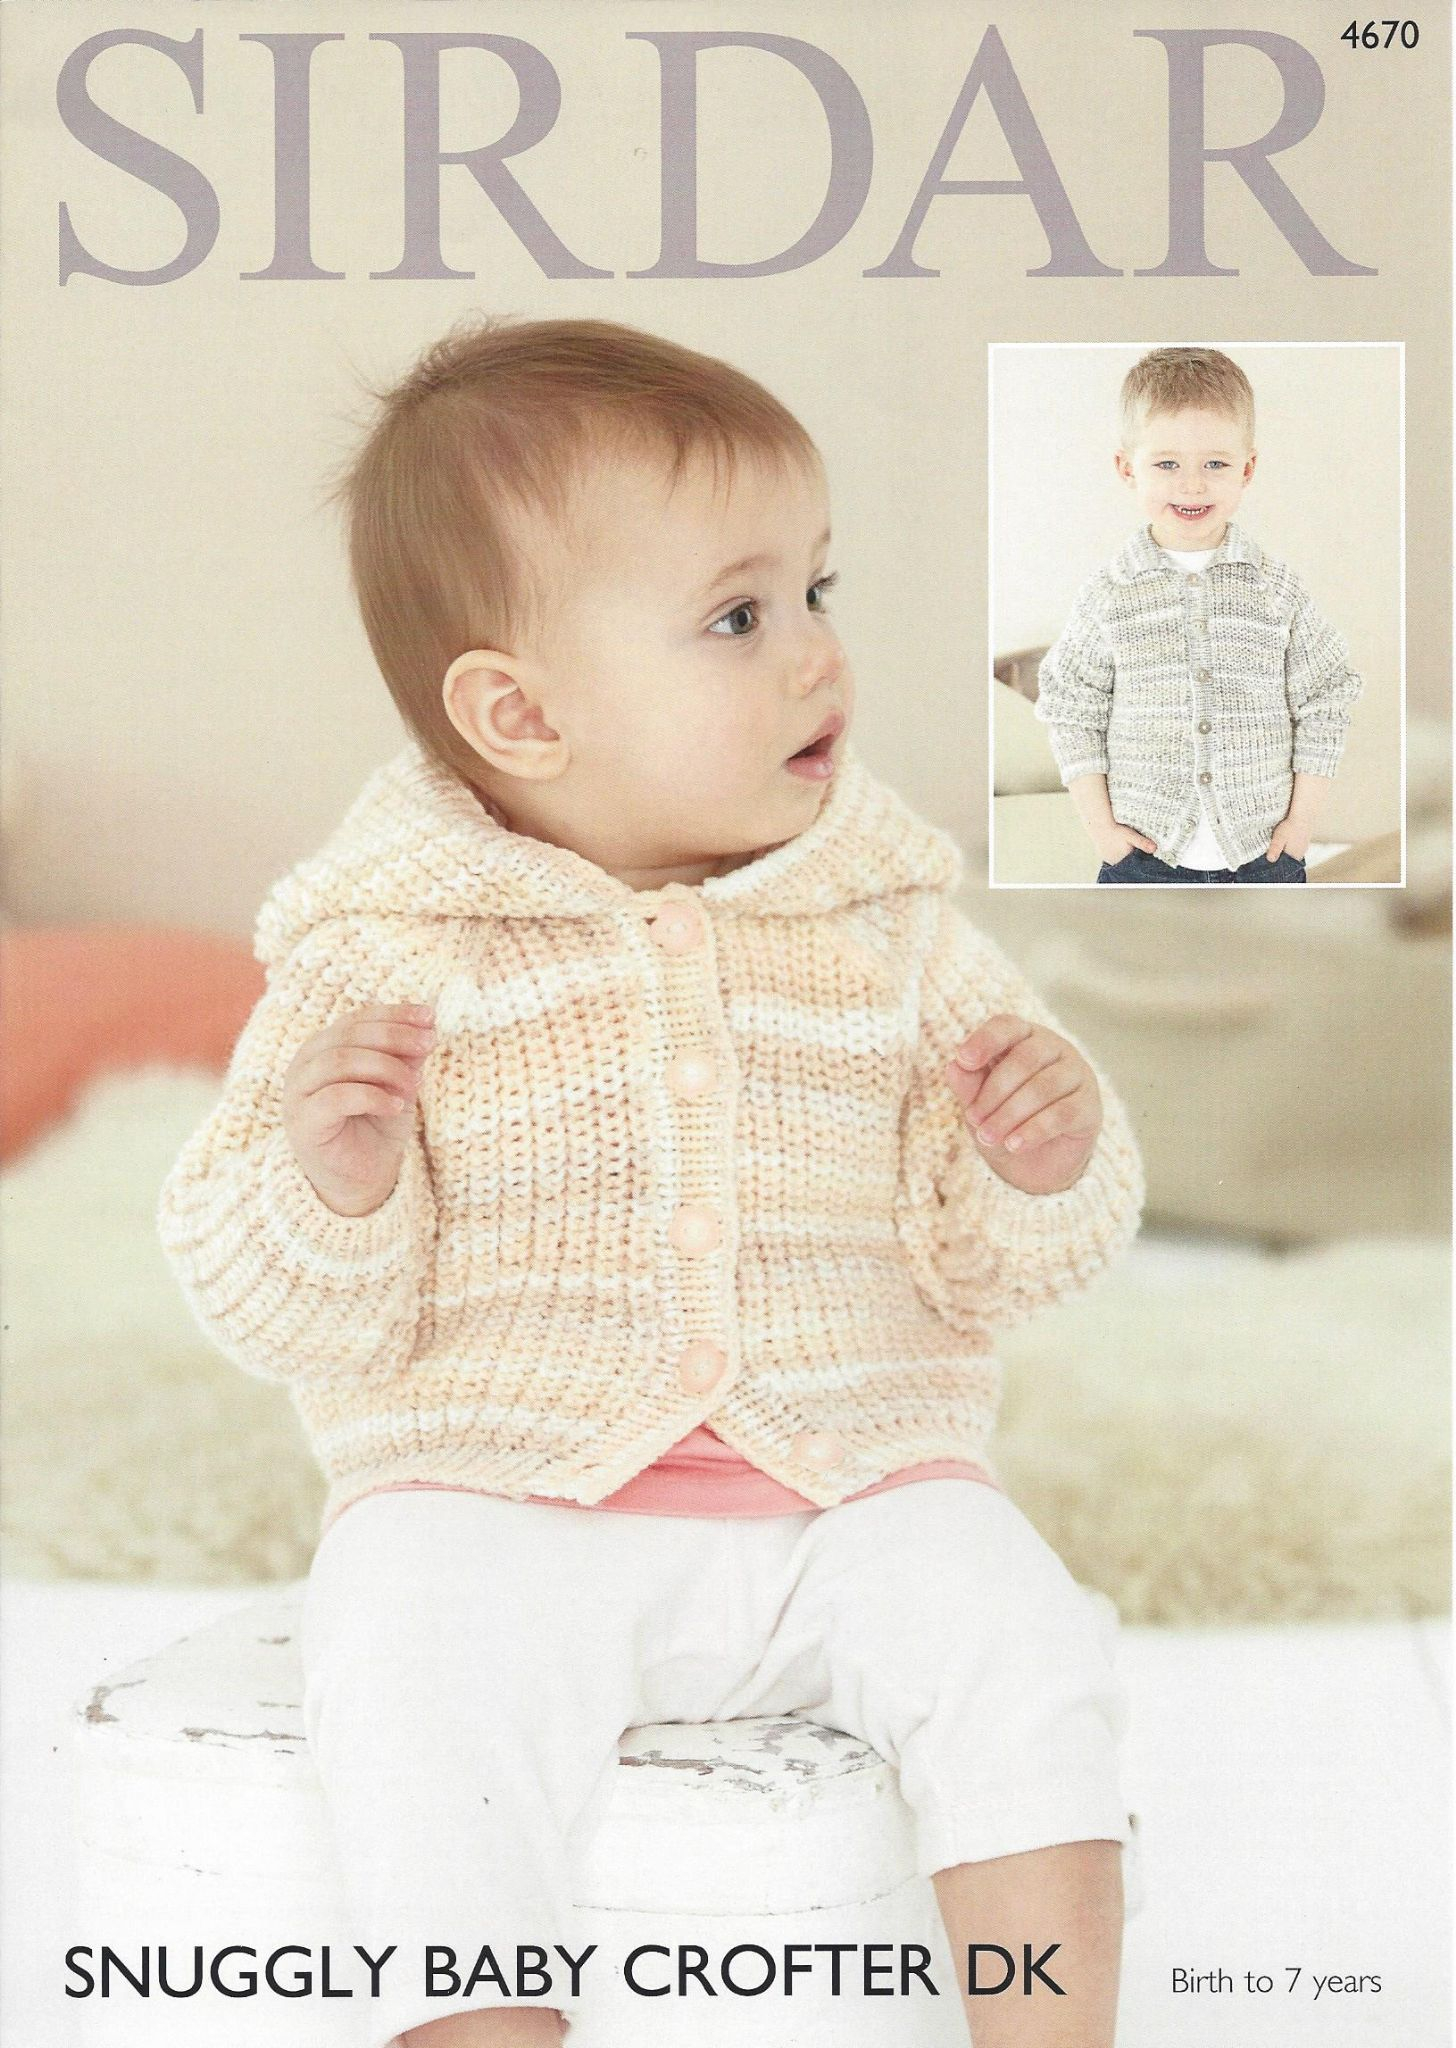 Sirdar Snuggly Knitting Patterns 4670 Sirdar Snuggly Ba Crofter Dk Jacket Knitting Pattern To Fit Birth To 7 Years